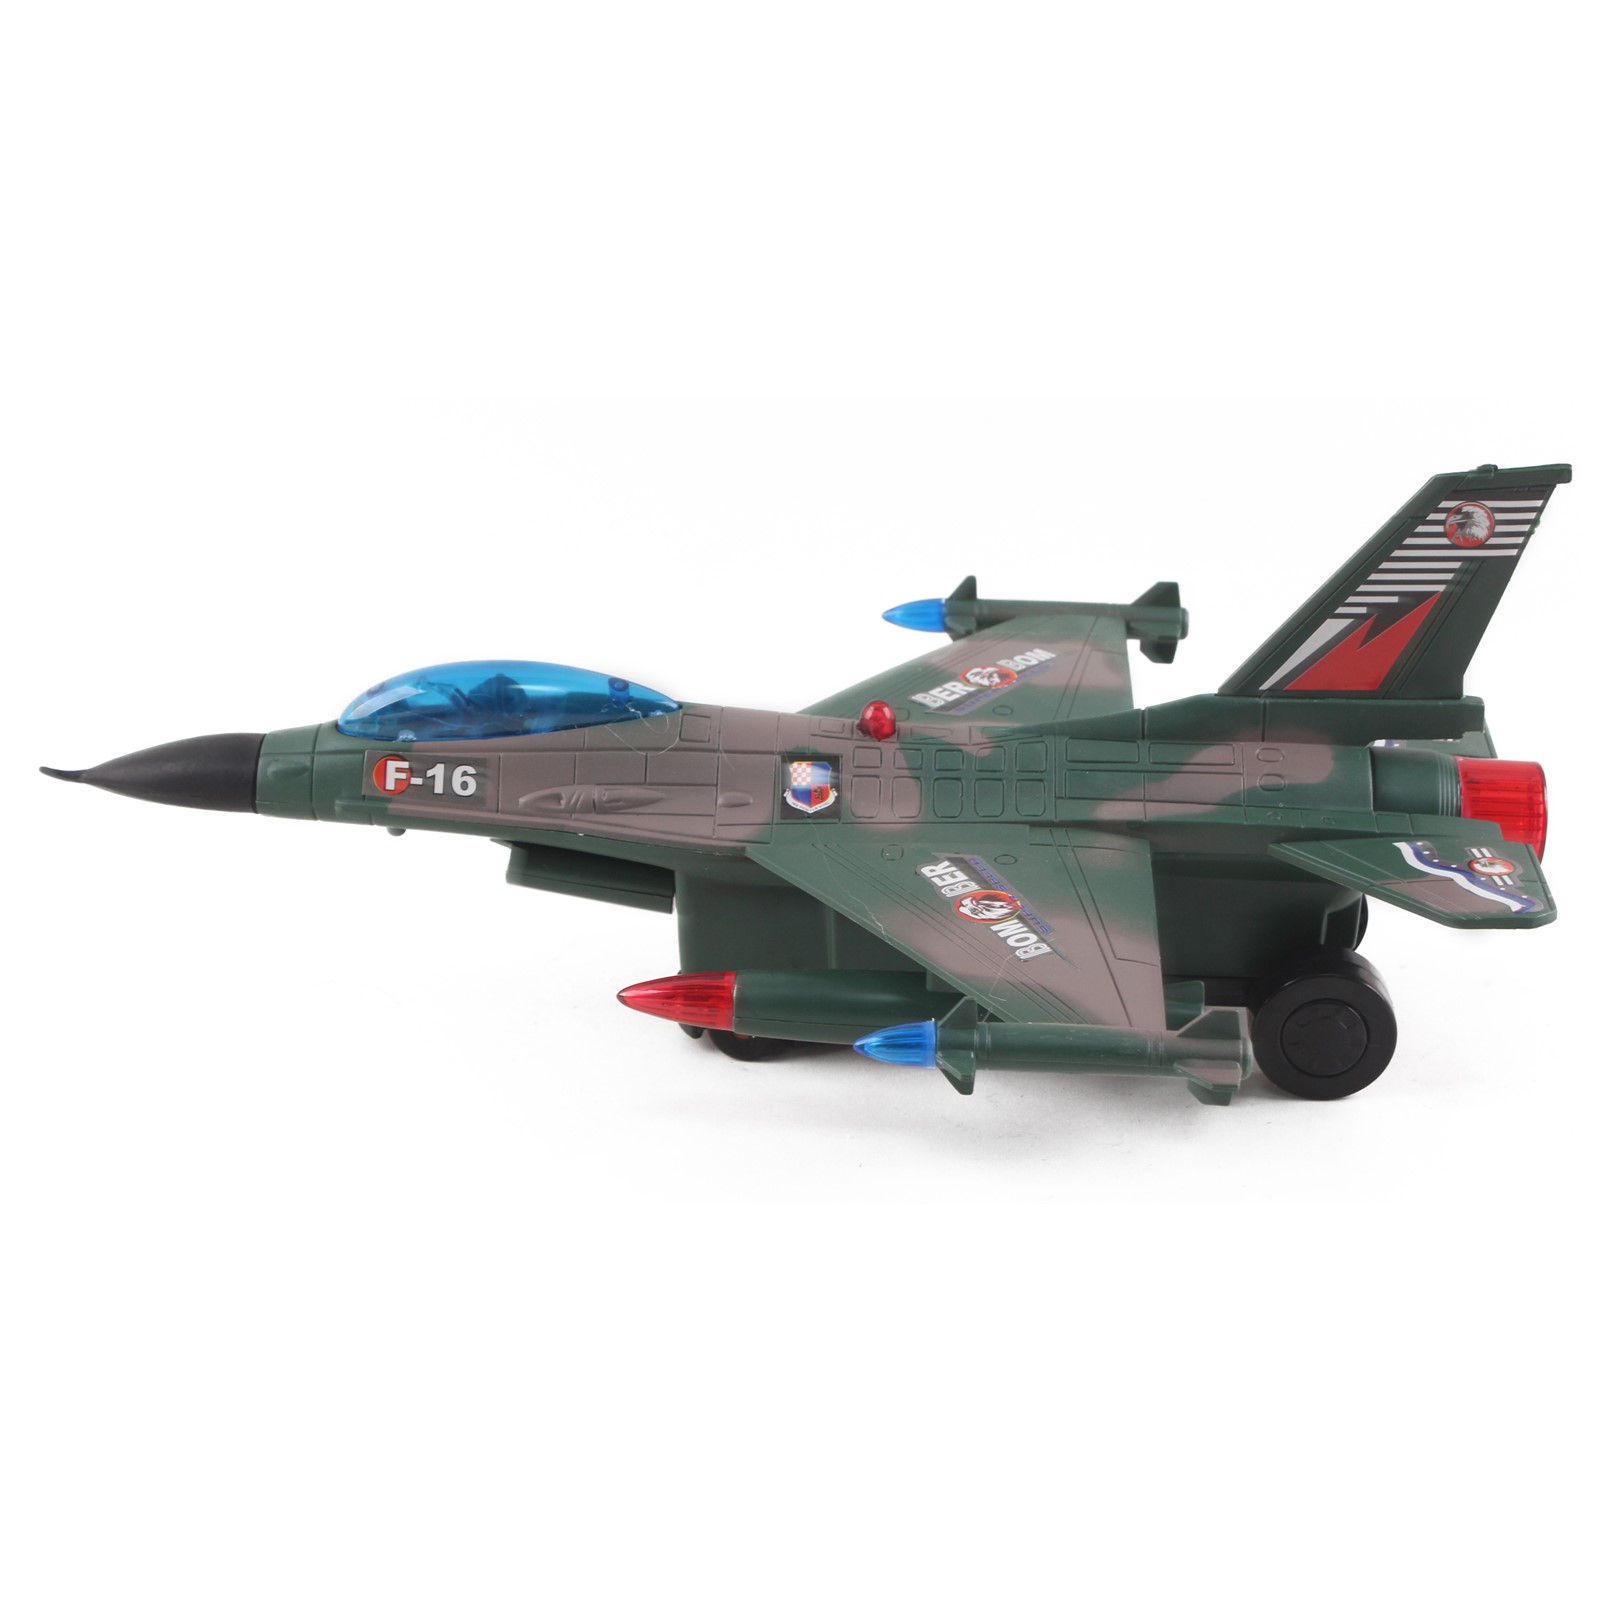 Toy Airplane Fighter Jet Friction Powered With Lights And Sounds For Kids TE-65 